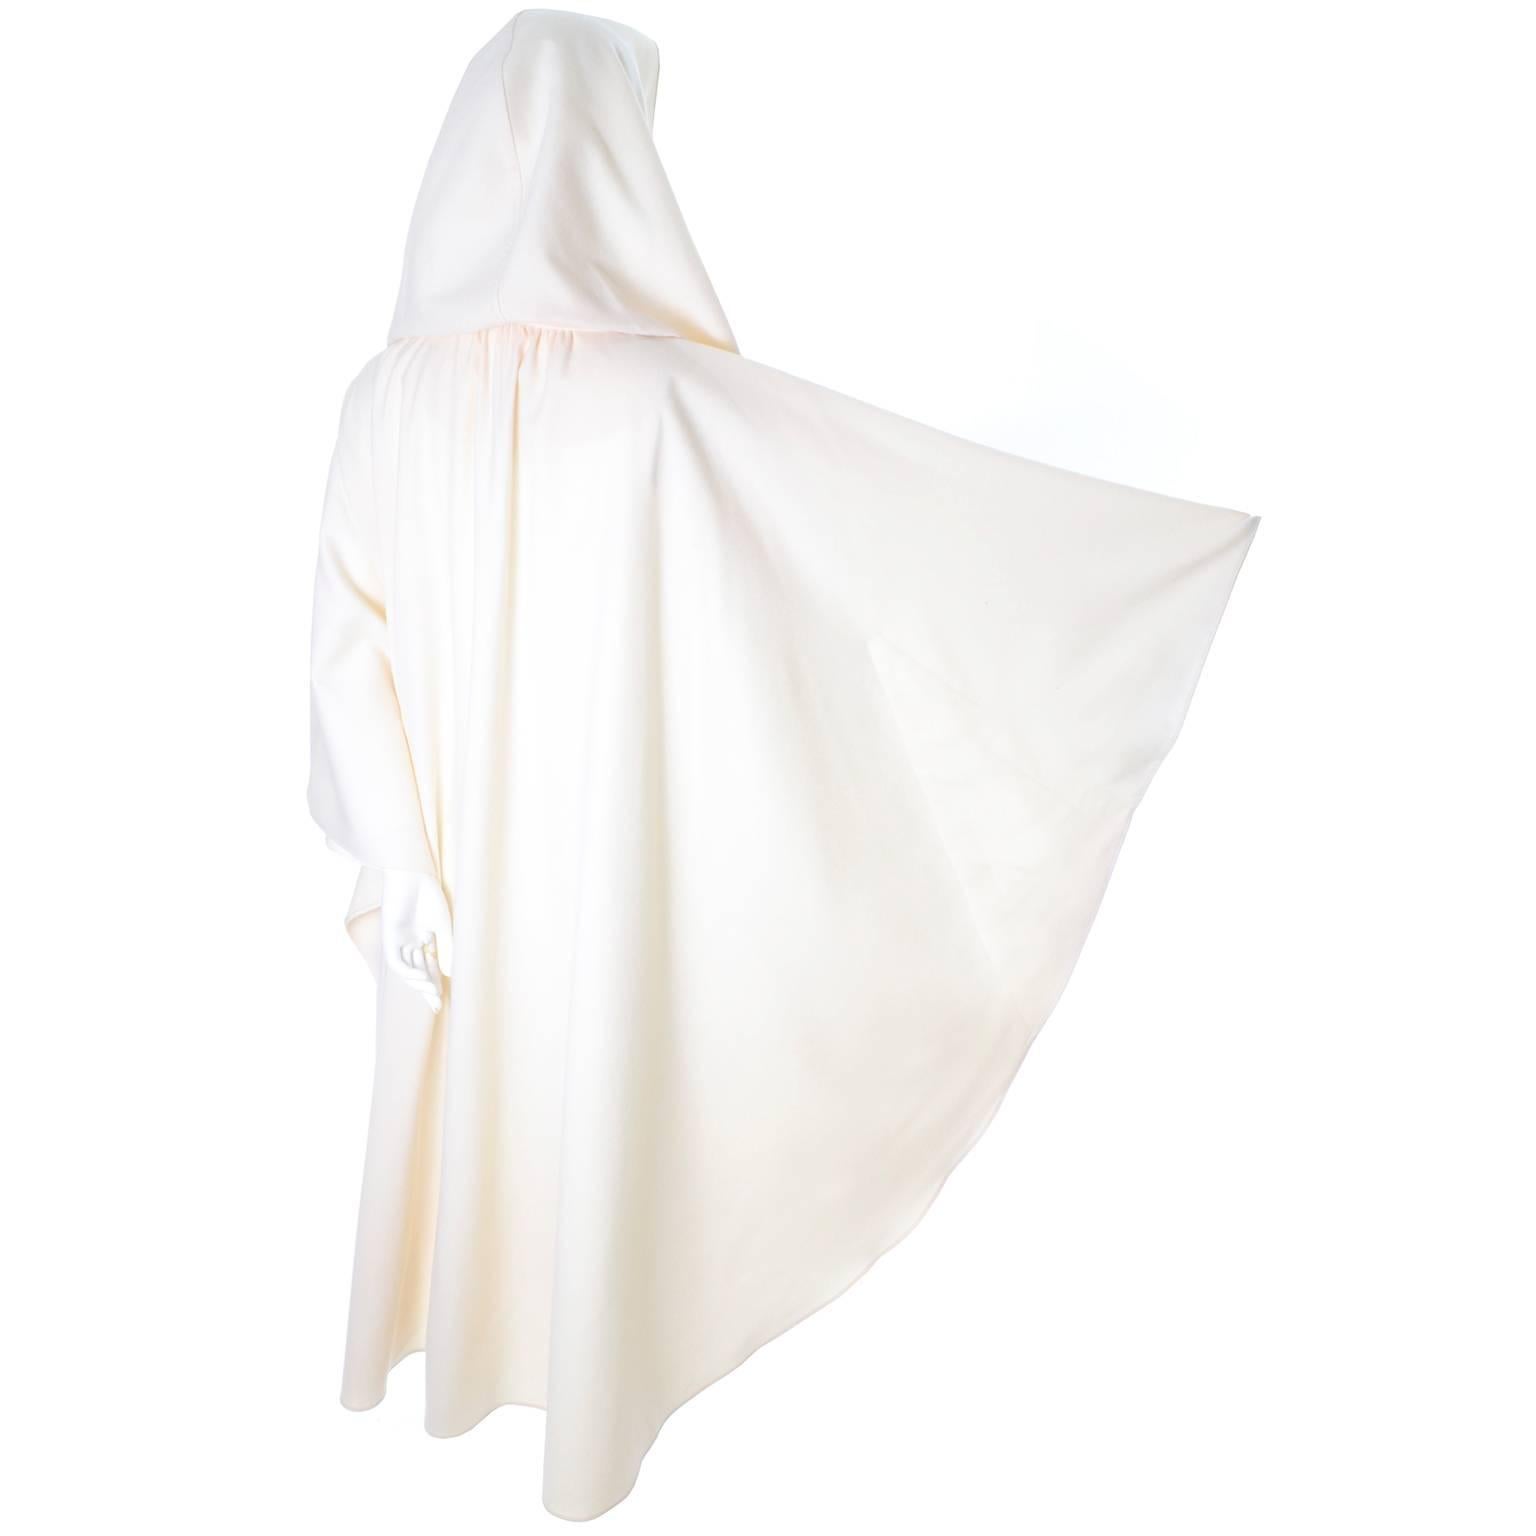 This one size cloak or cape is in pure winter white wool and has a single button closure at the neck.  The cape has a 17